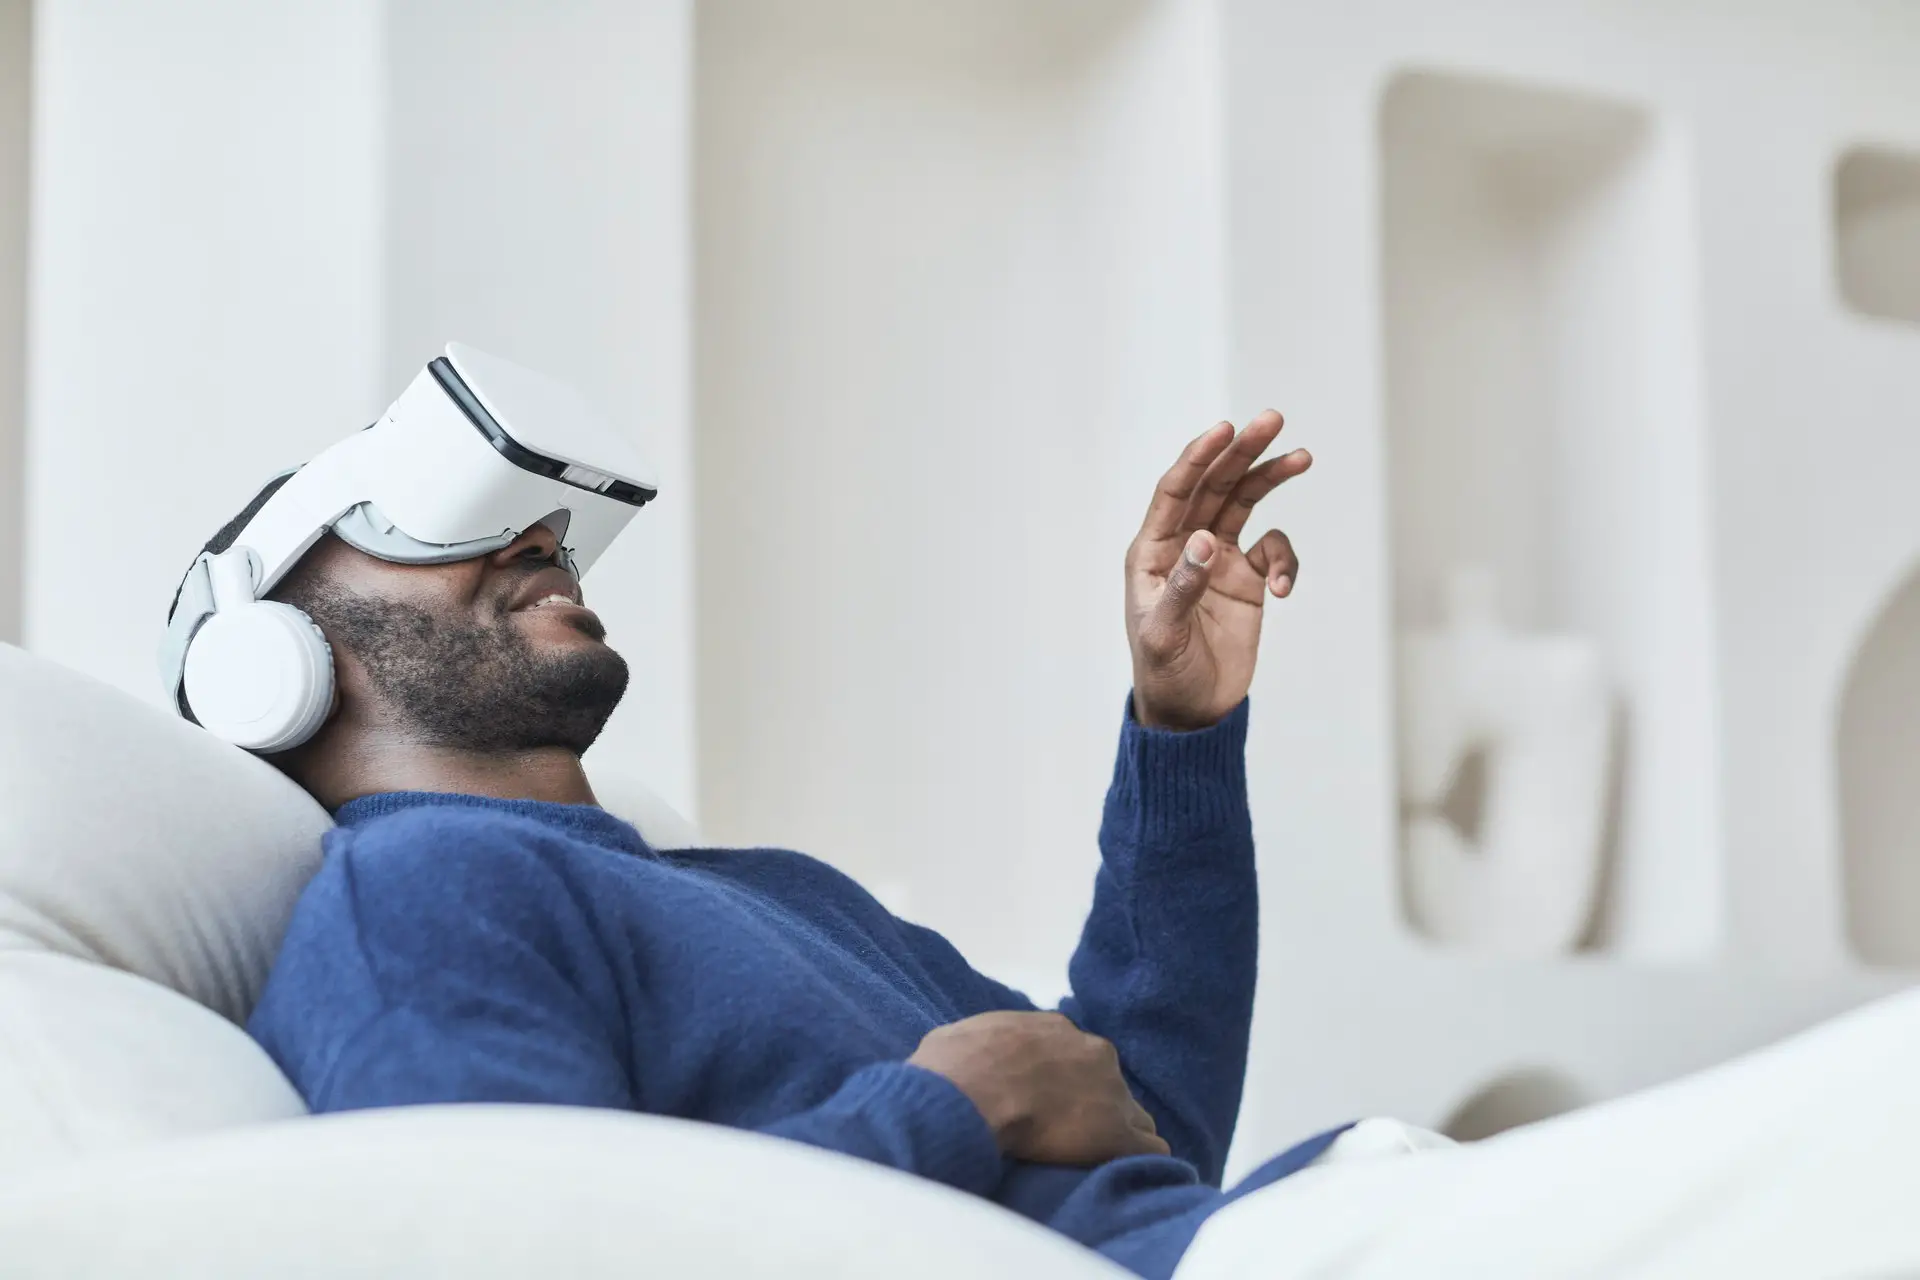 Aequilibrium Aims to Connect Businesses with AR Creators with a New, Intuitive Platform